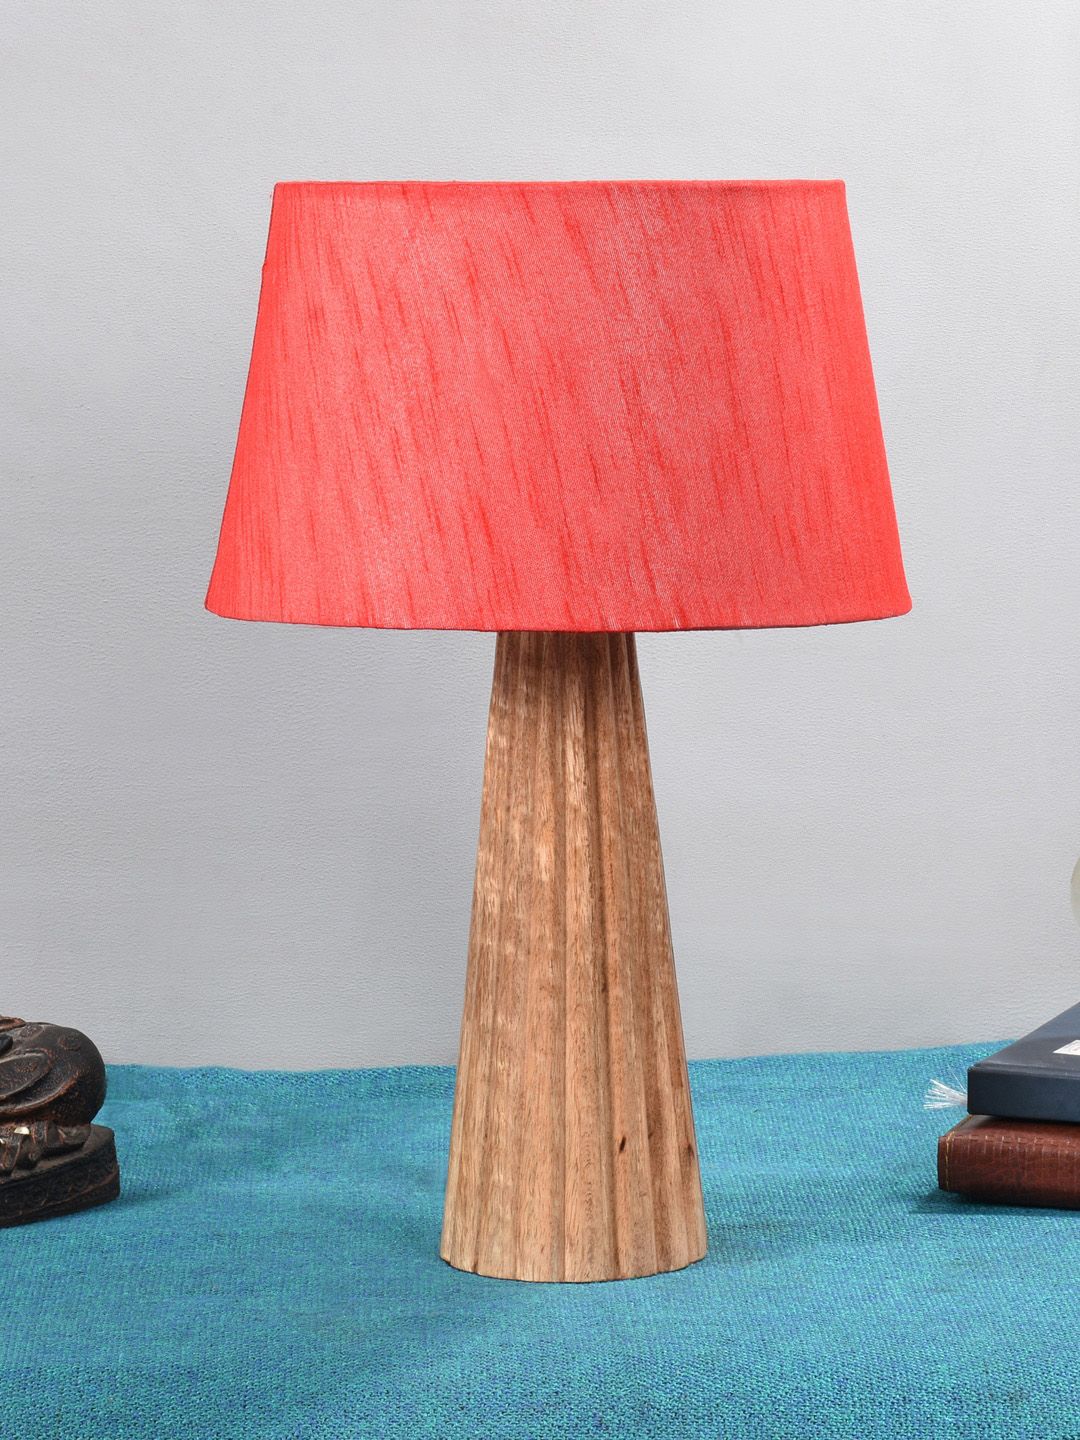 foziq Brown & Coral Textured Wooden Table Lamps Price in India